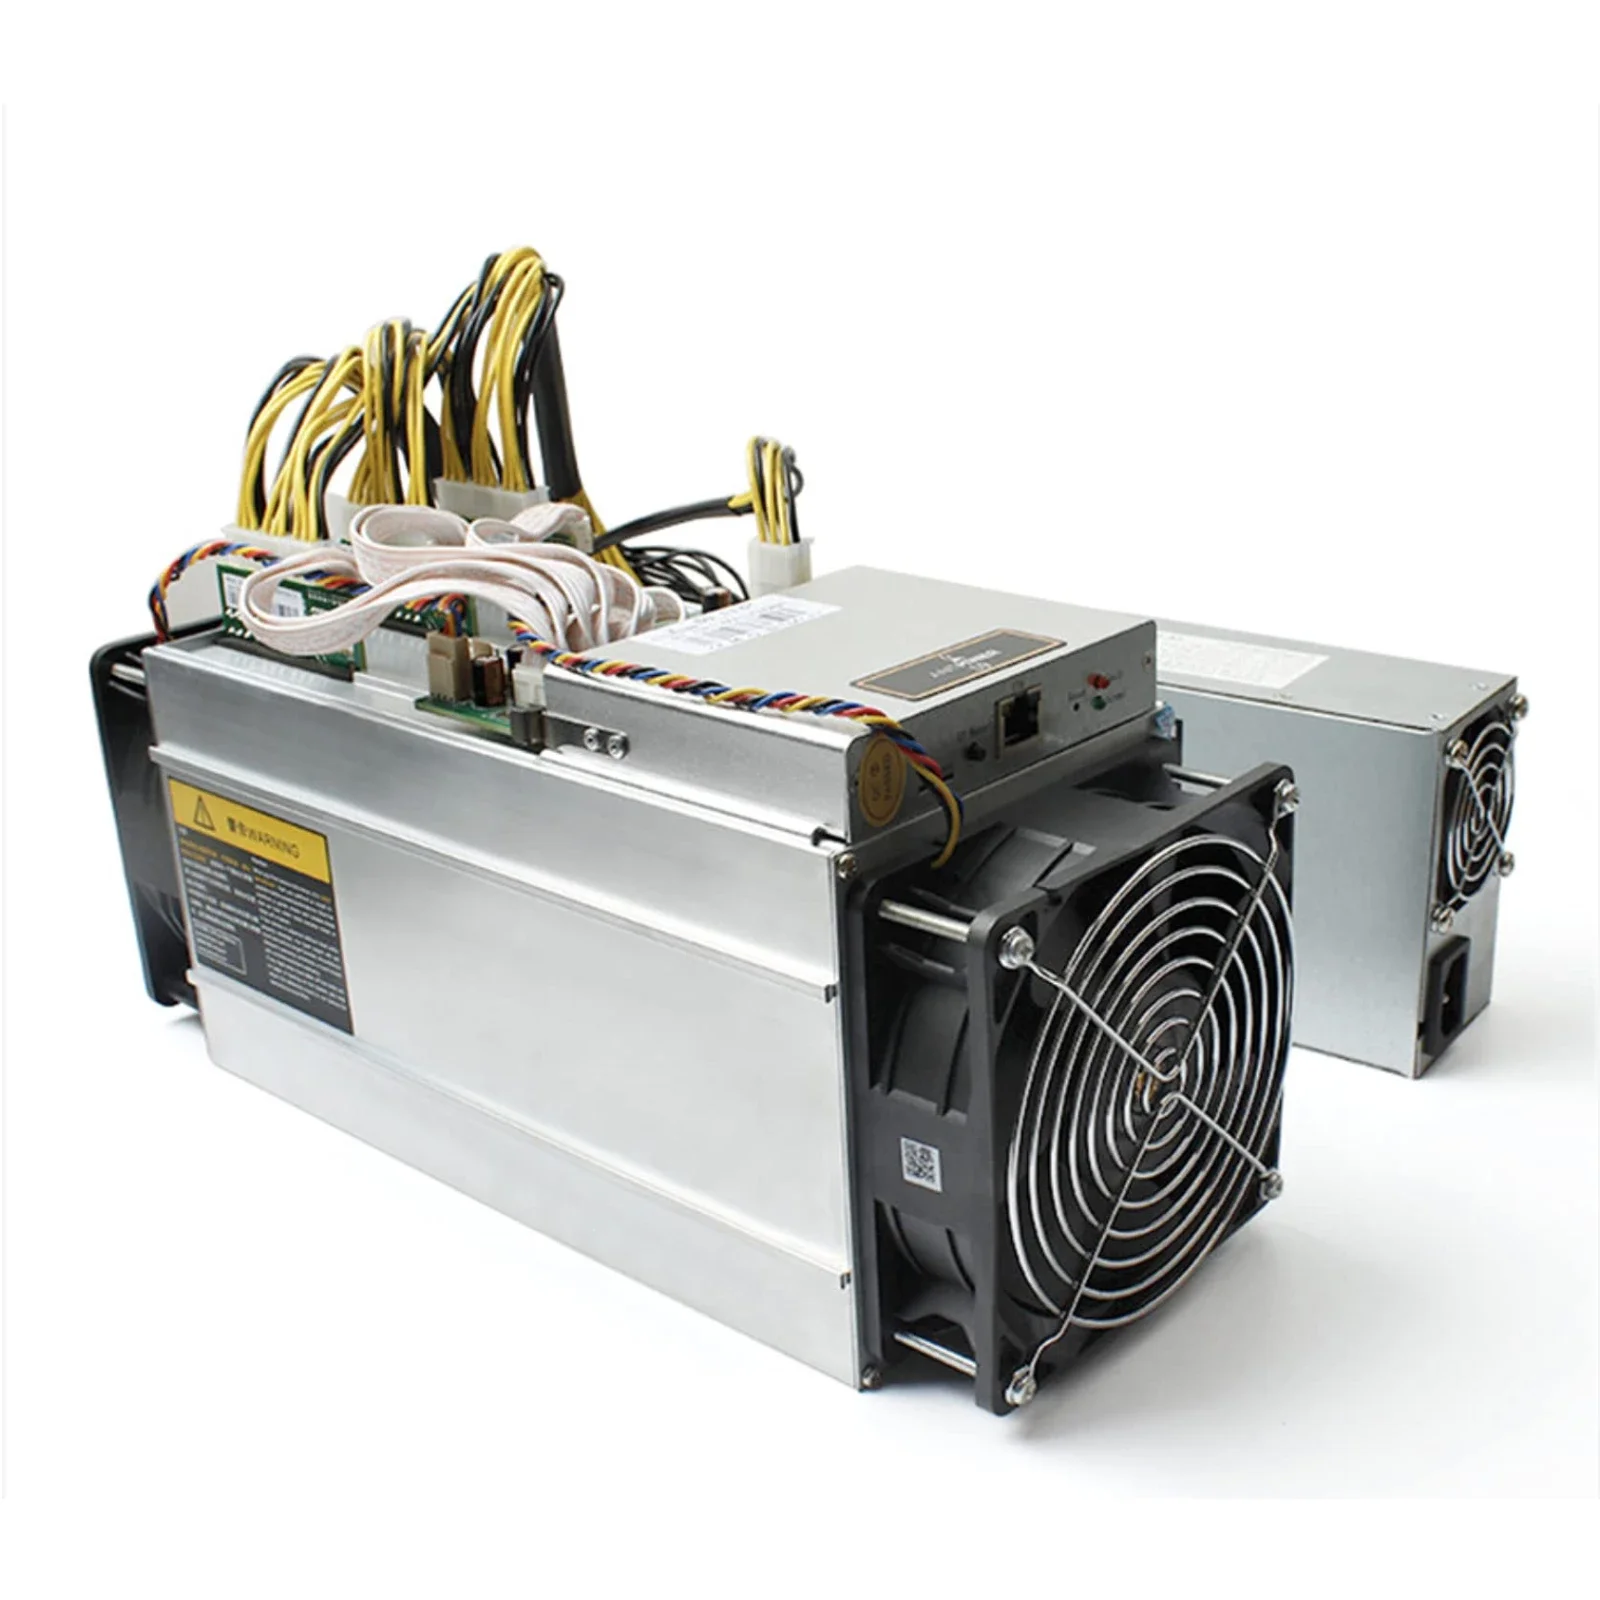 ANTMINER L3++( With power supply )Scrypt Litecoin Miner 580MH/s LTC Come  with Doge Coin Mining Machine ASIC Than ANTMINER L3 L3+